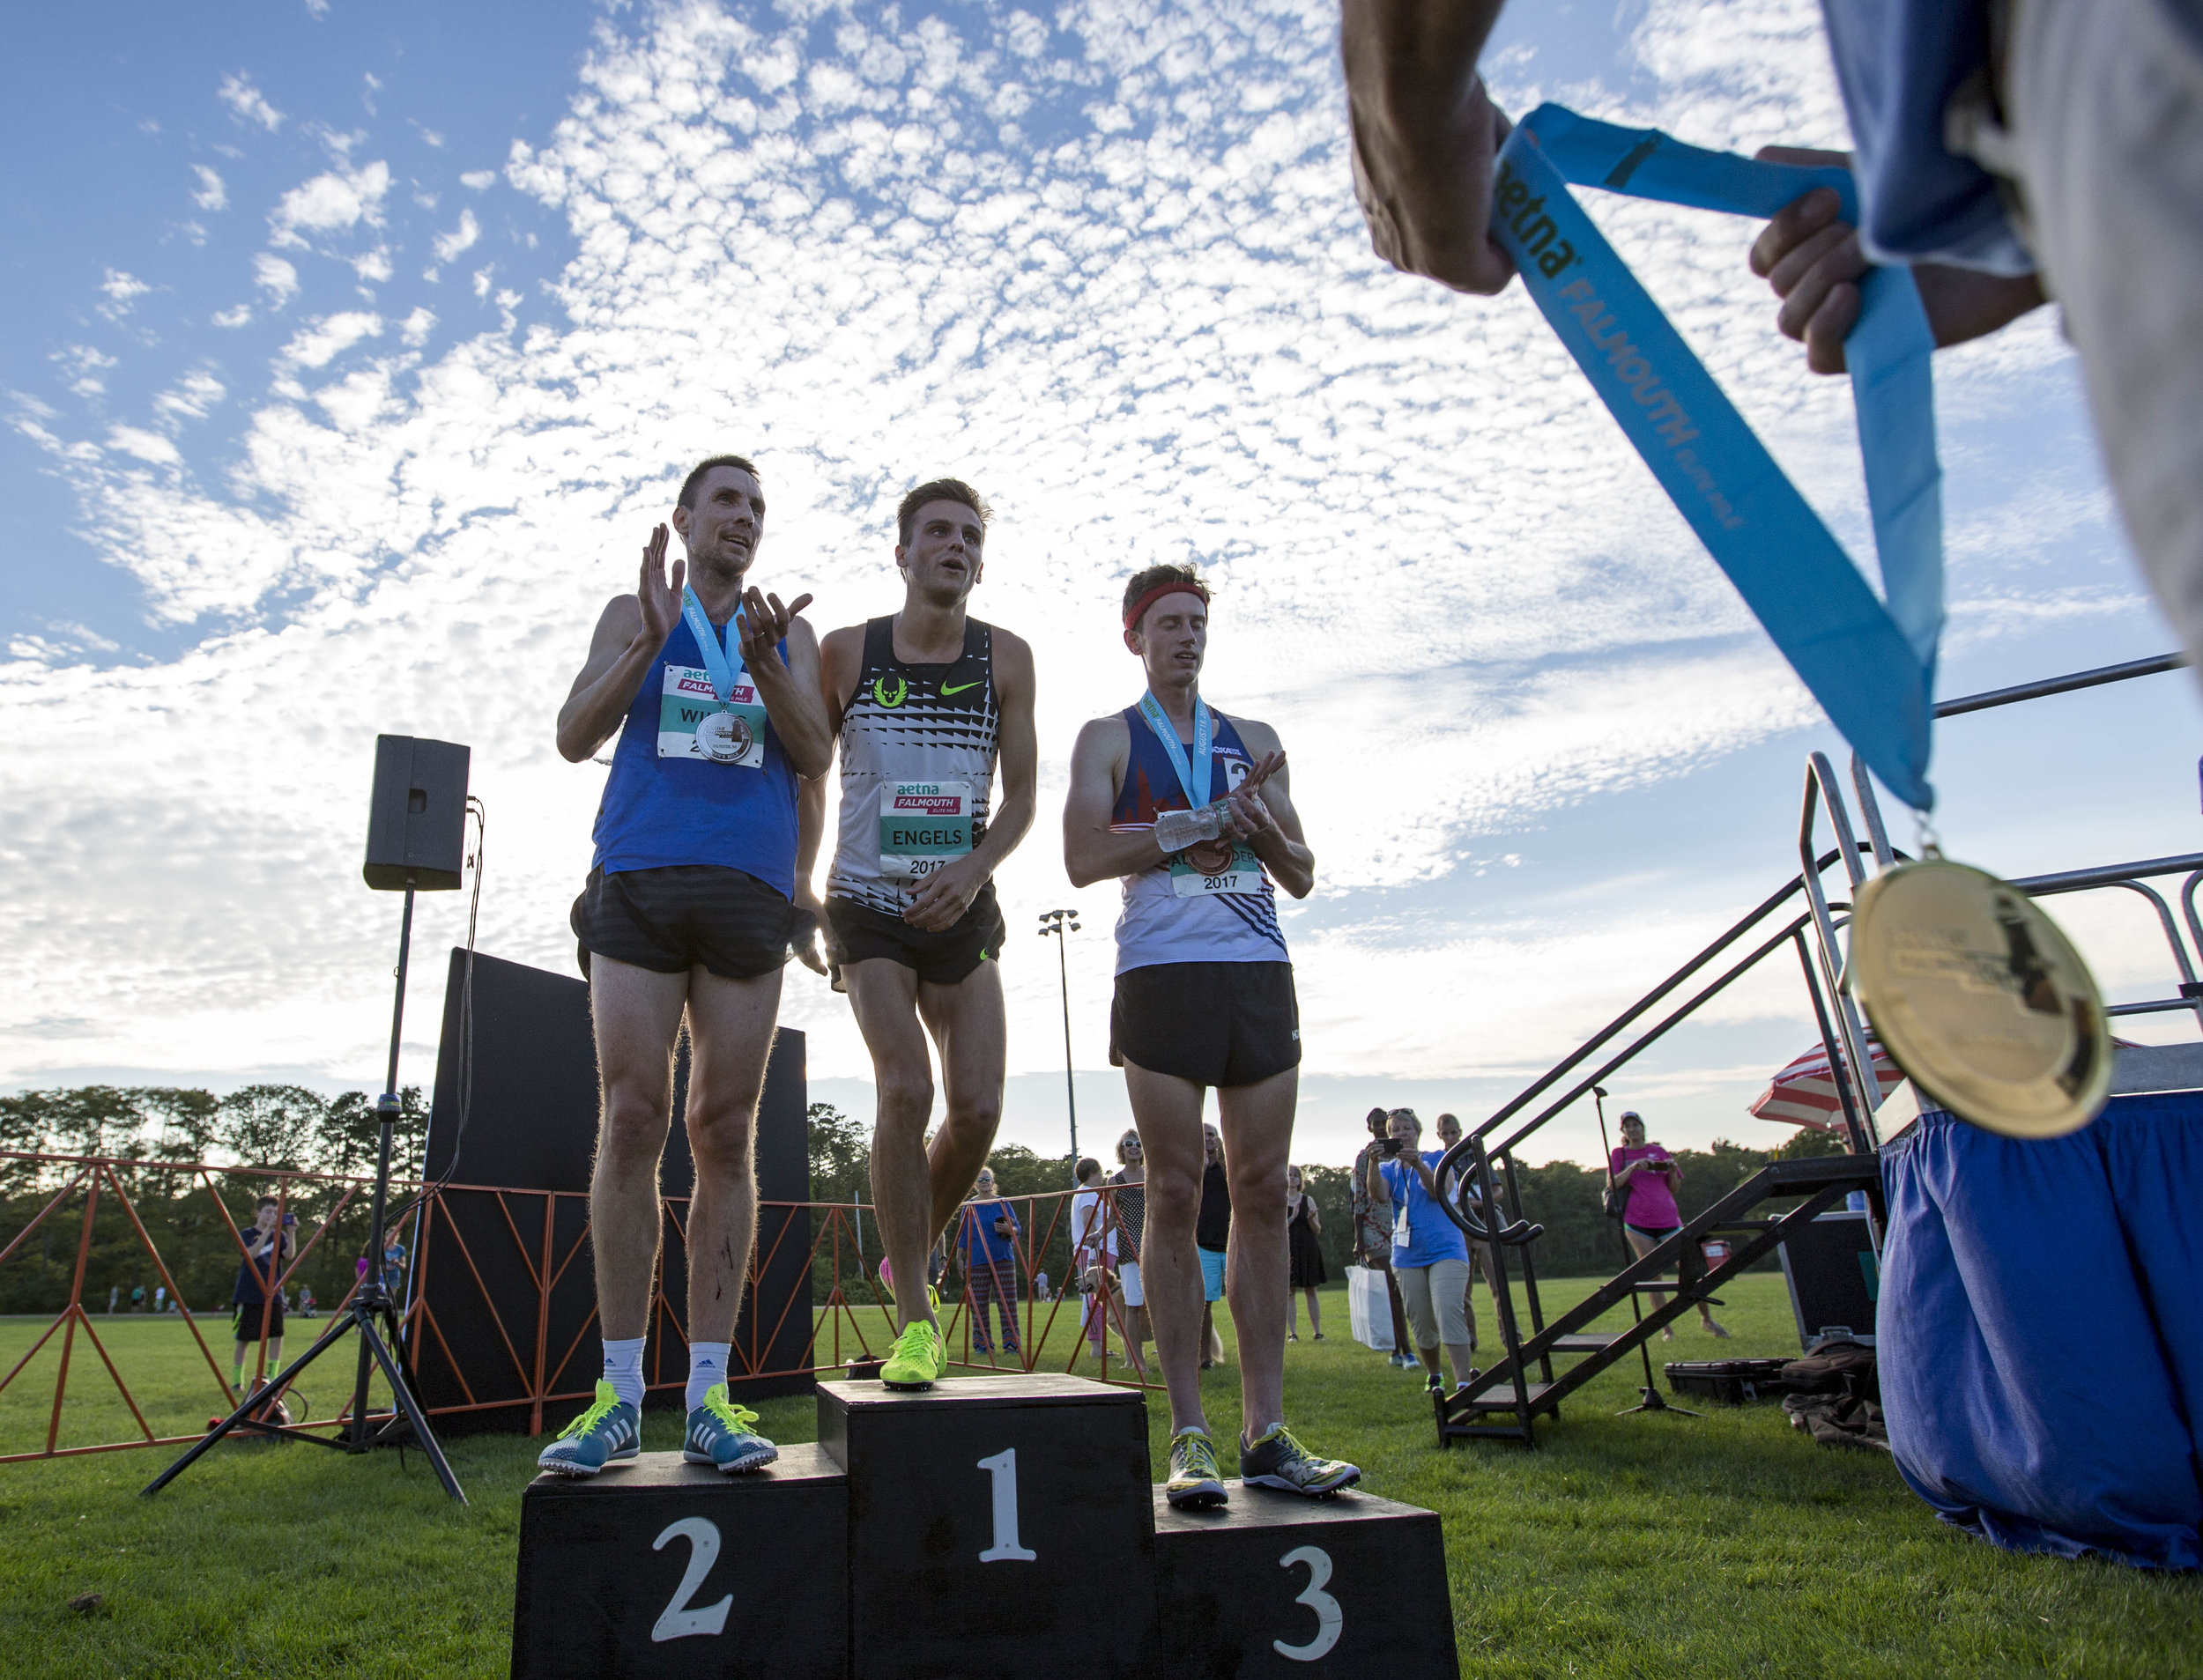  Craig Engels steps up to accept his first place metal next to Nick Willis and Colby Alexander after winning the men's Aetna Falmouth Elite Mile on August 19, 2017. 